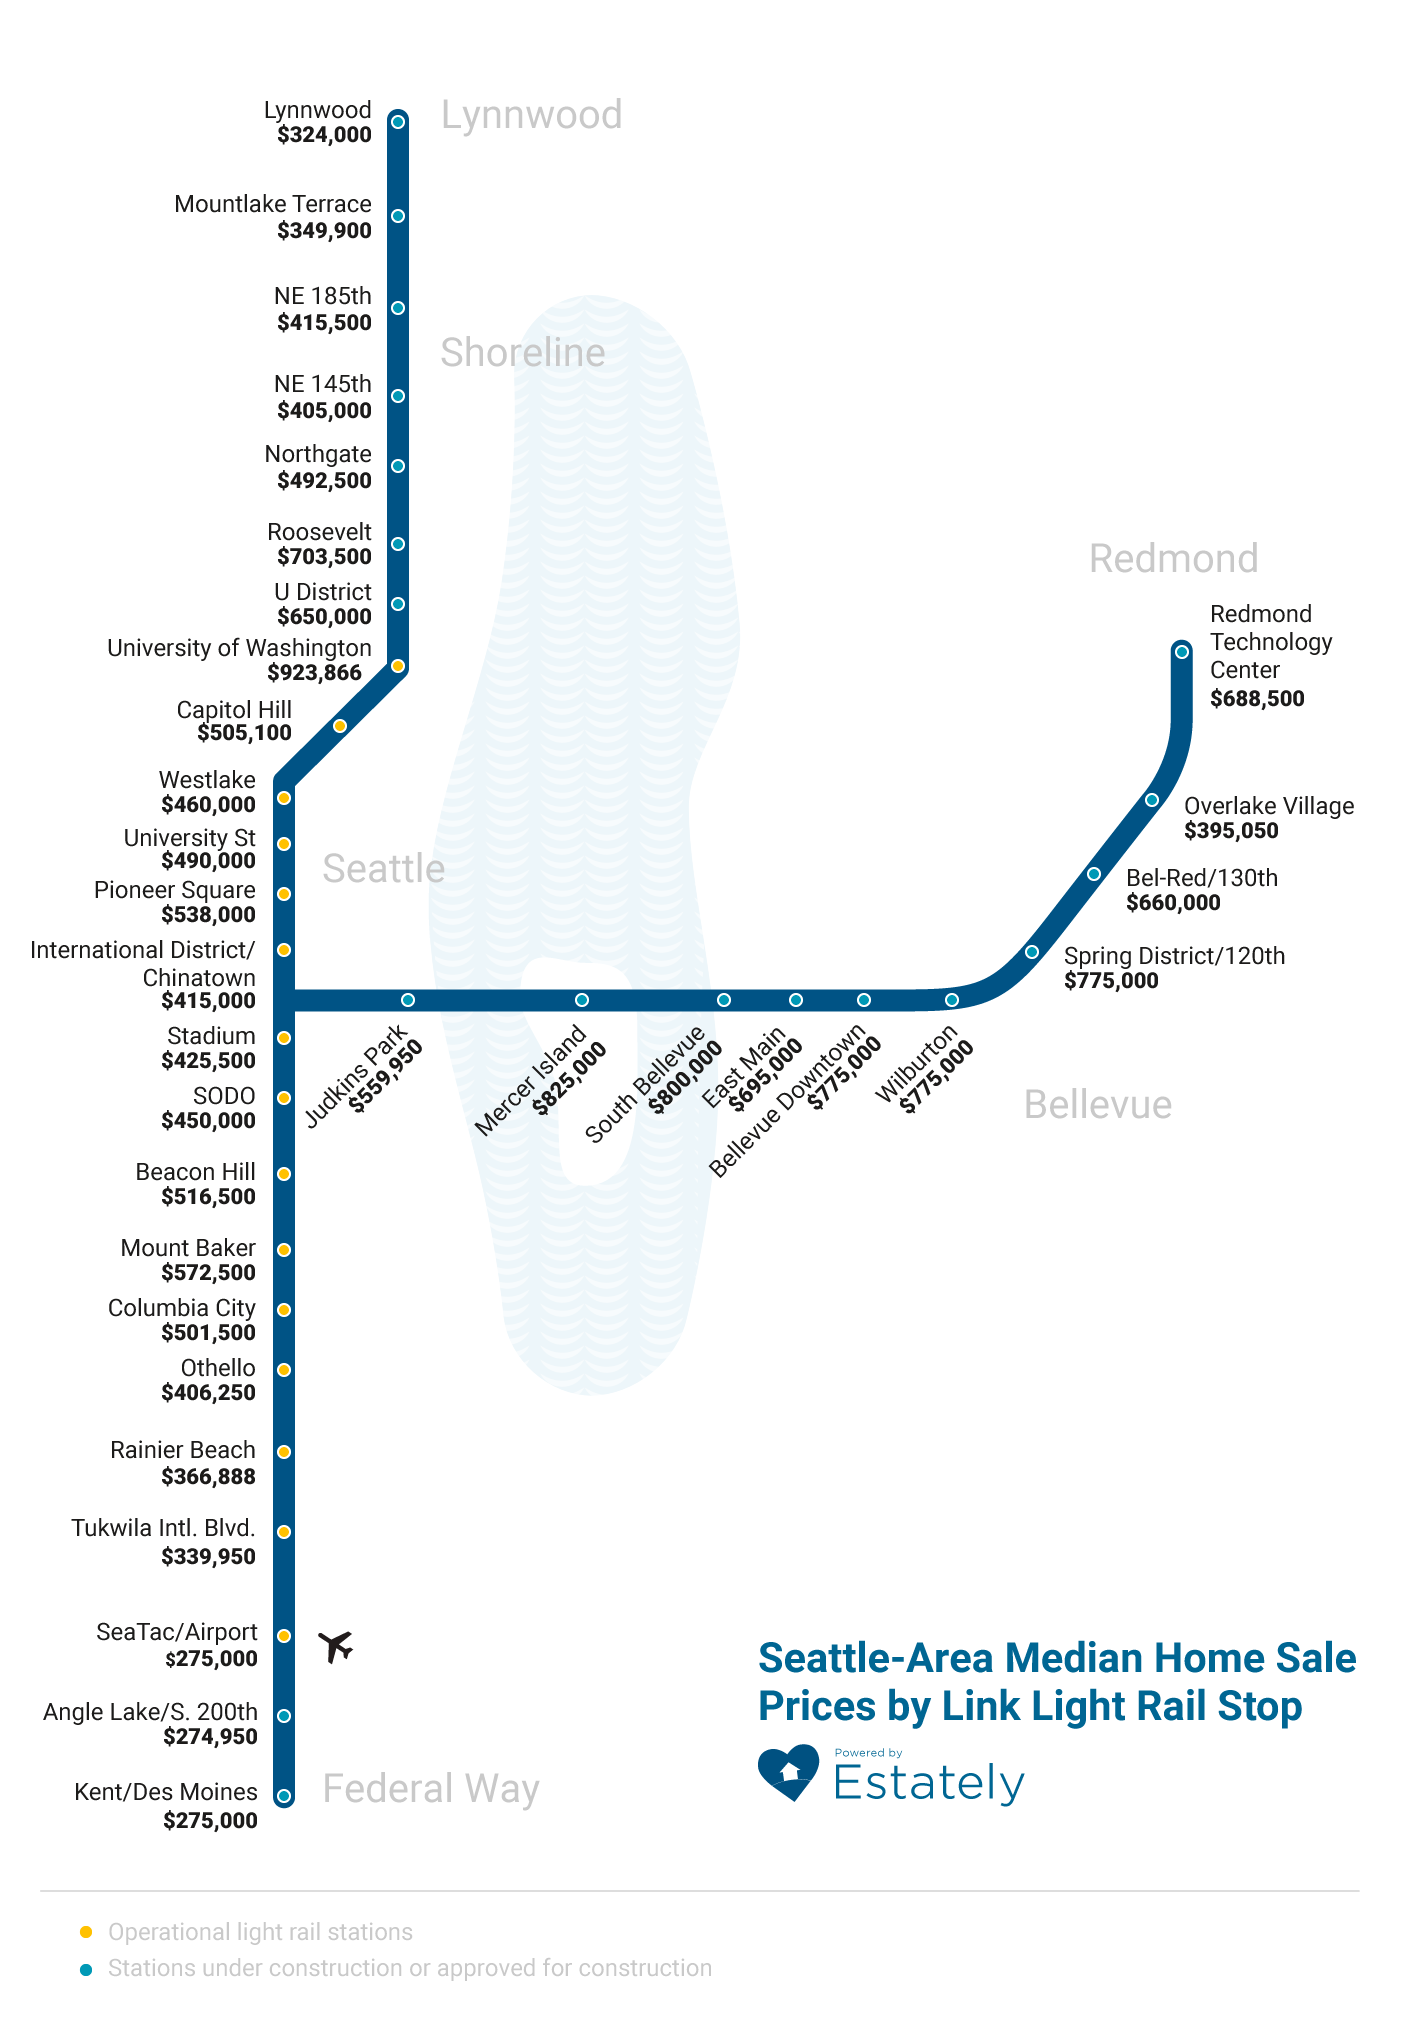 Seattle Area Home Median Prices by Transit Stop